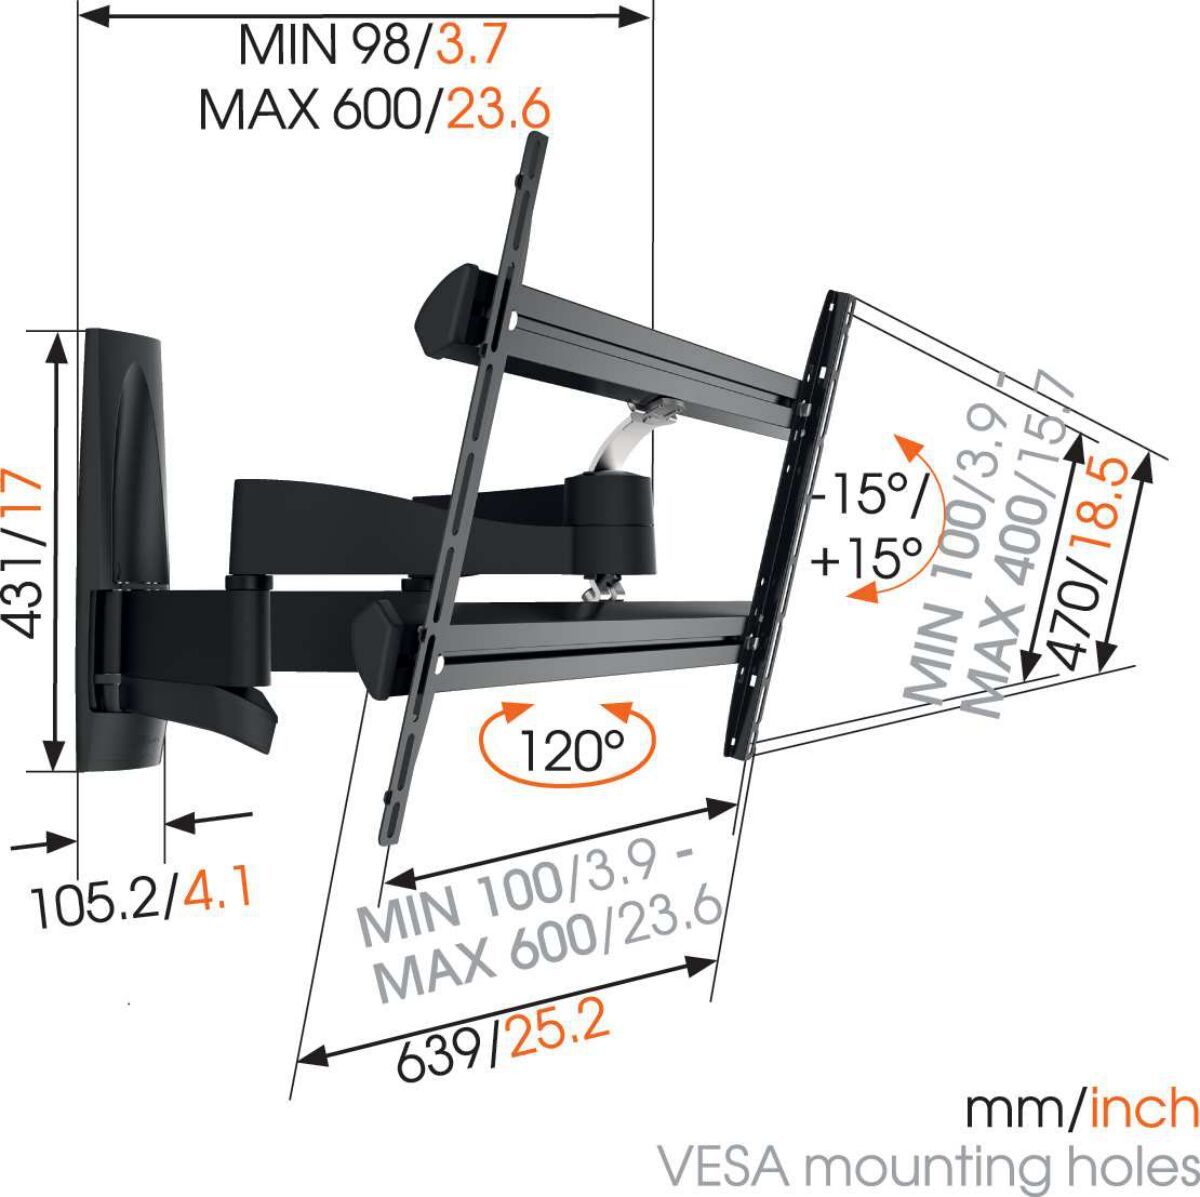 Vogel's WALL 3350 Full-Motion TV Wall Mount - Suitable for 40 up to 65 inch TVs - Forward and turning motion (up to 120°) - Tilt up to 15° - Dimensions